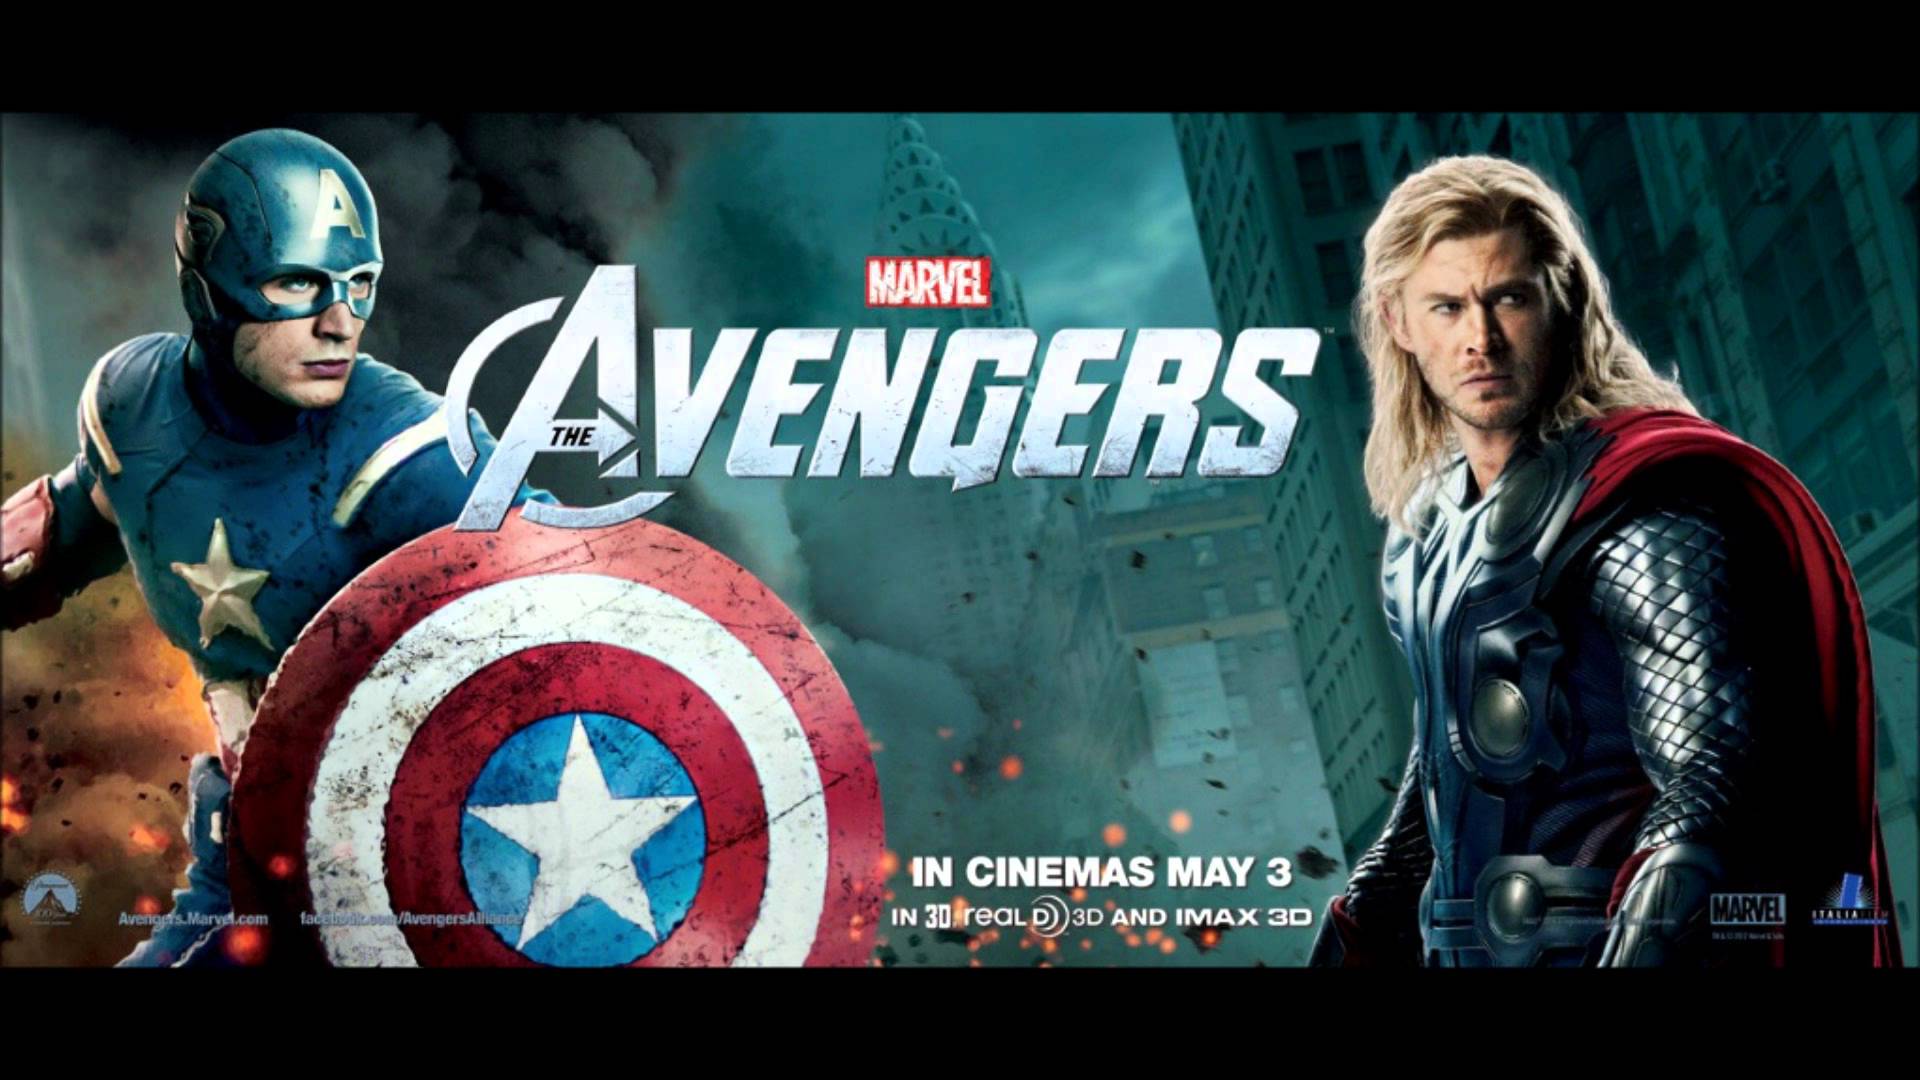 the avengers movie download 1080p